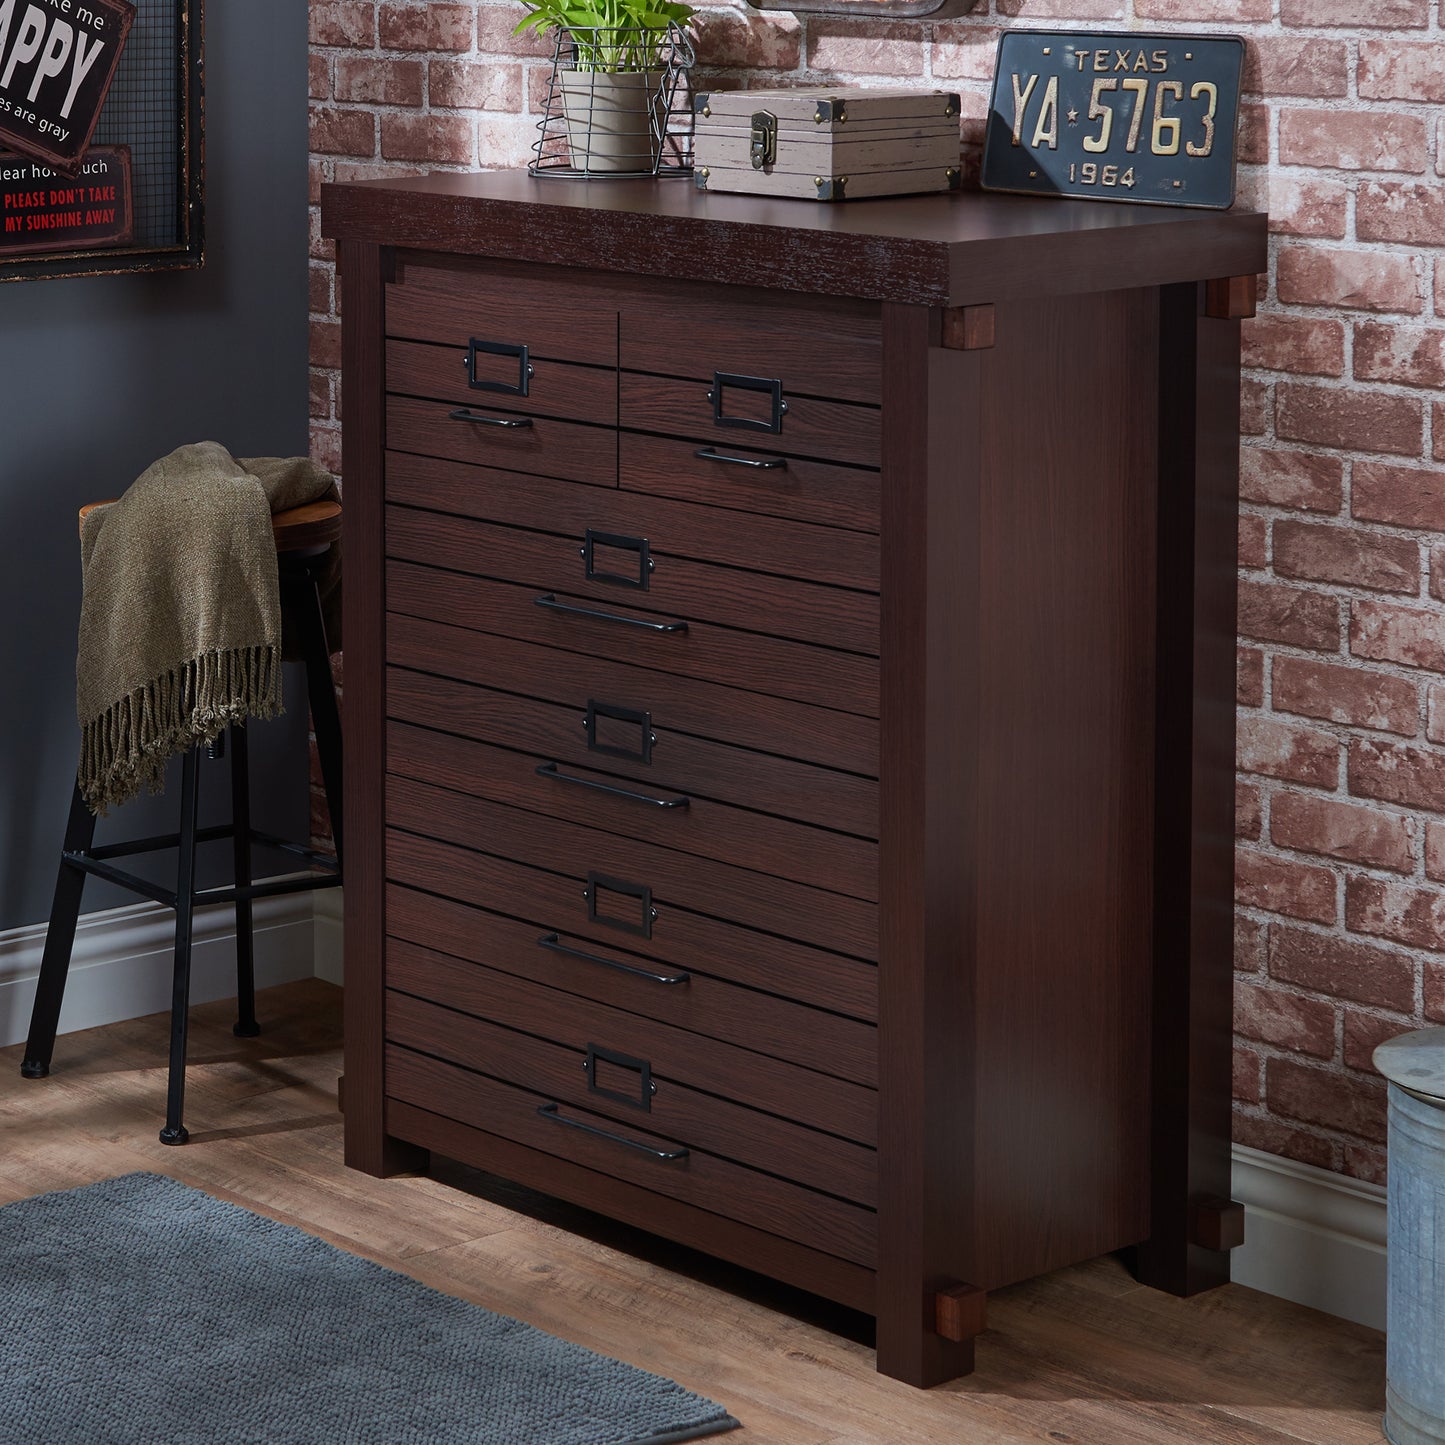 Left angled rustic espresso six-drawer plank chest dresser in a living space with accessories